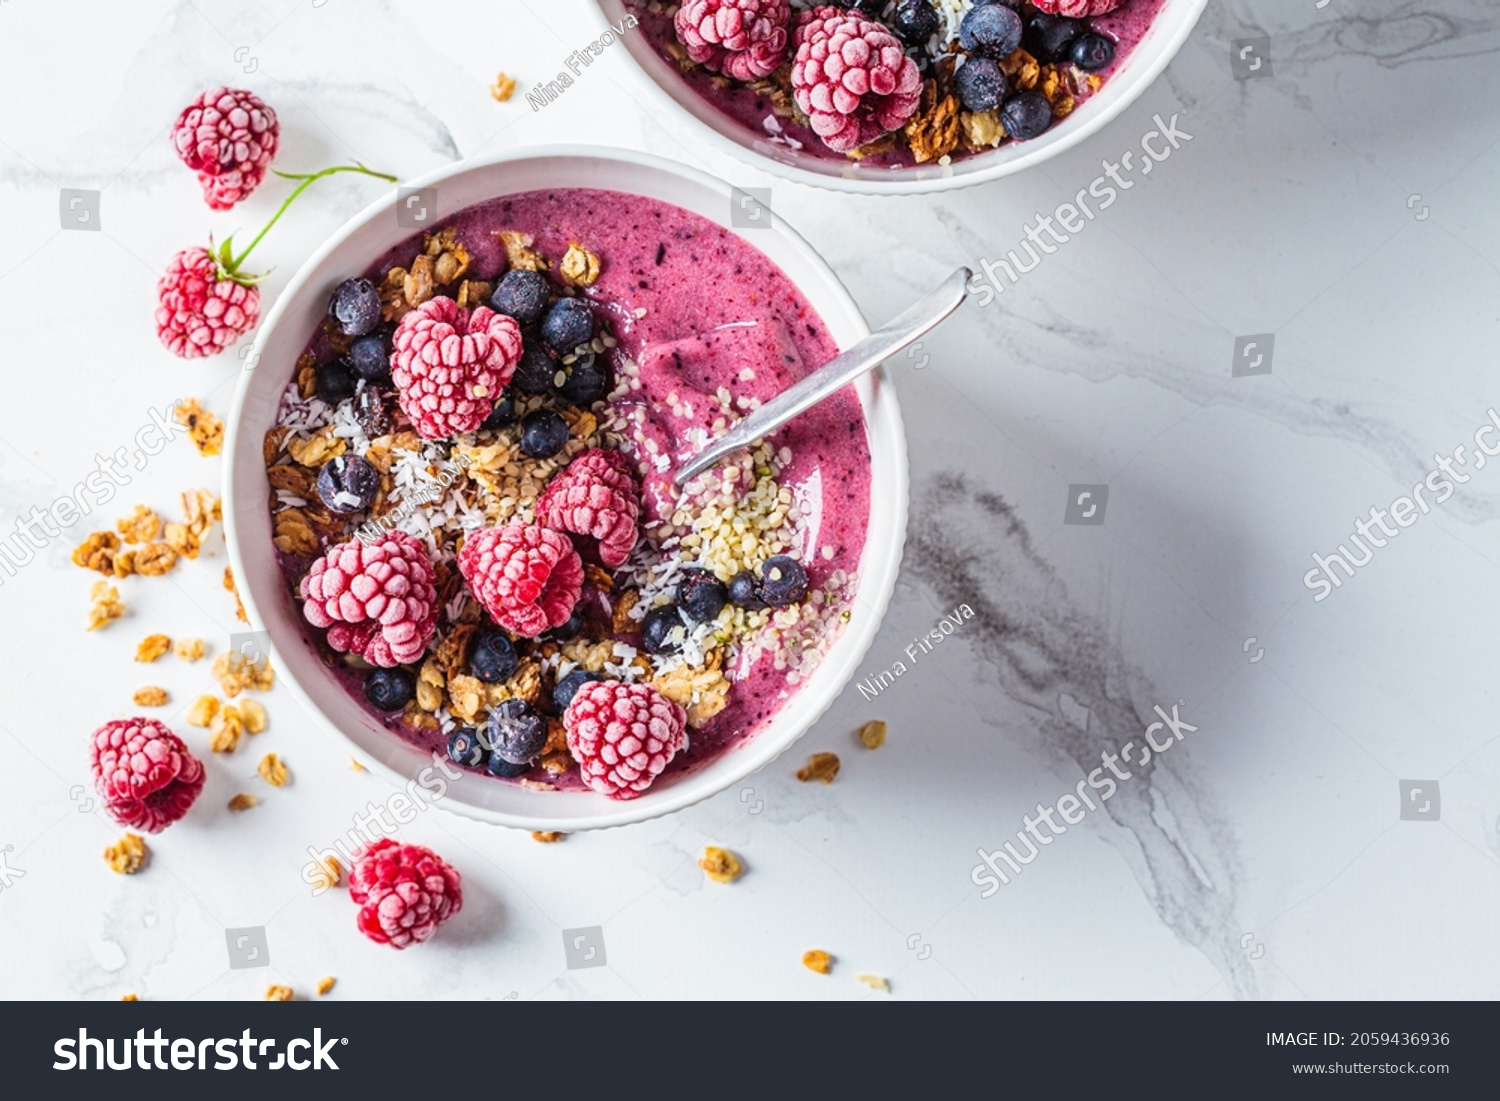 Berry smoothie bowl with granola, coconut and hemp seeds, white marble background, top view, close-up. Vegan food concept. #2059436936